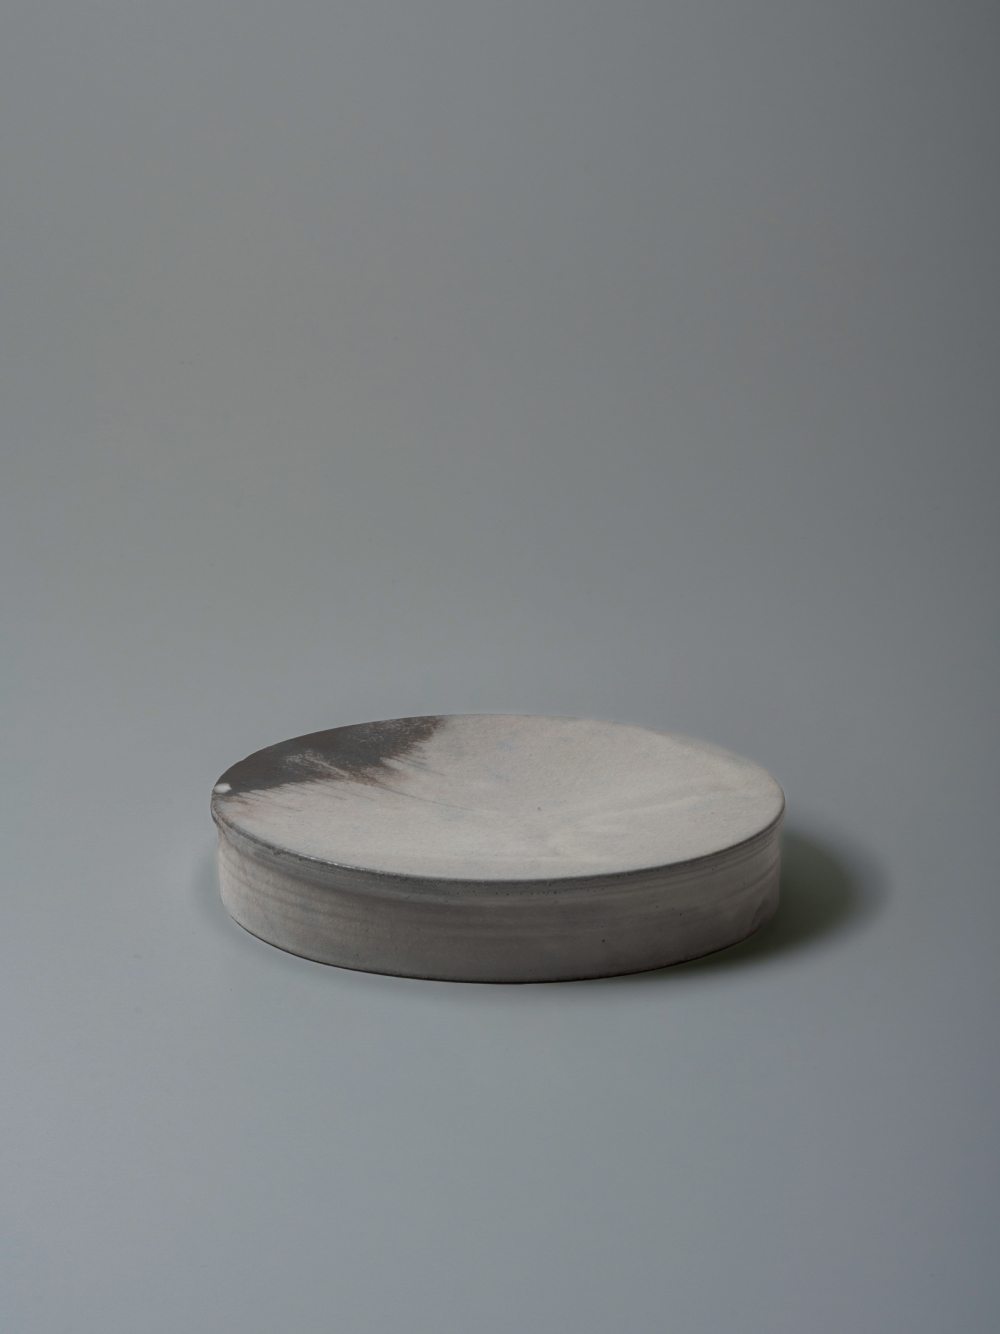 8.5 Elevated Plate<br />Wood ash and white liquid clay glaze